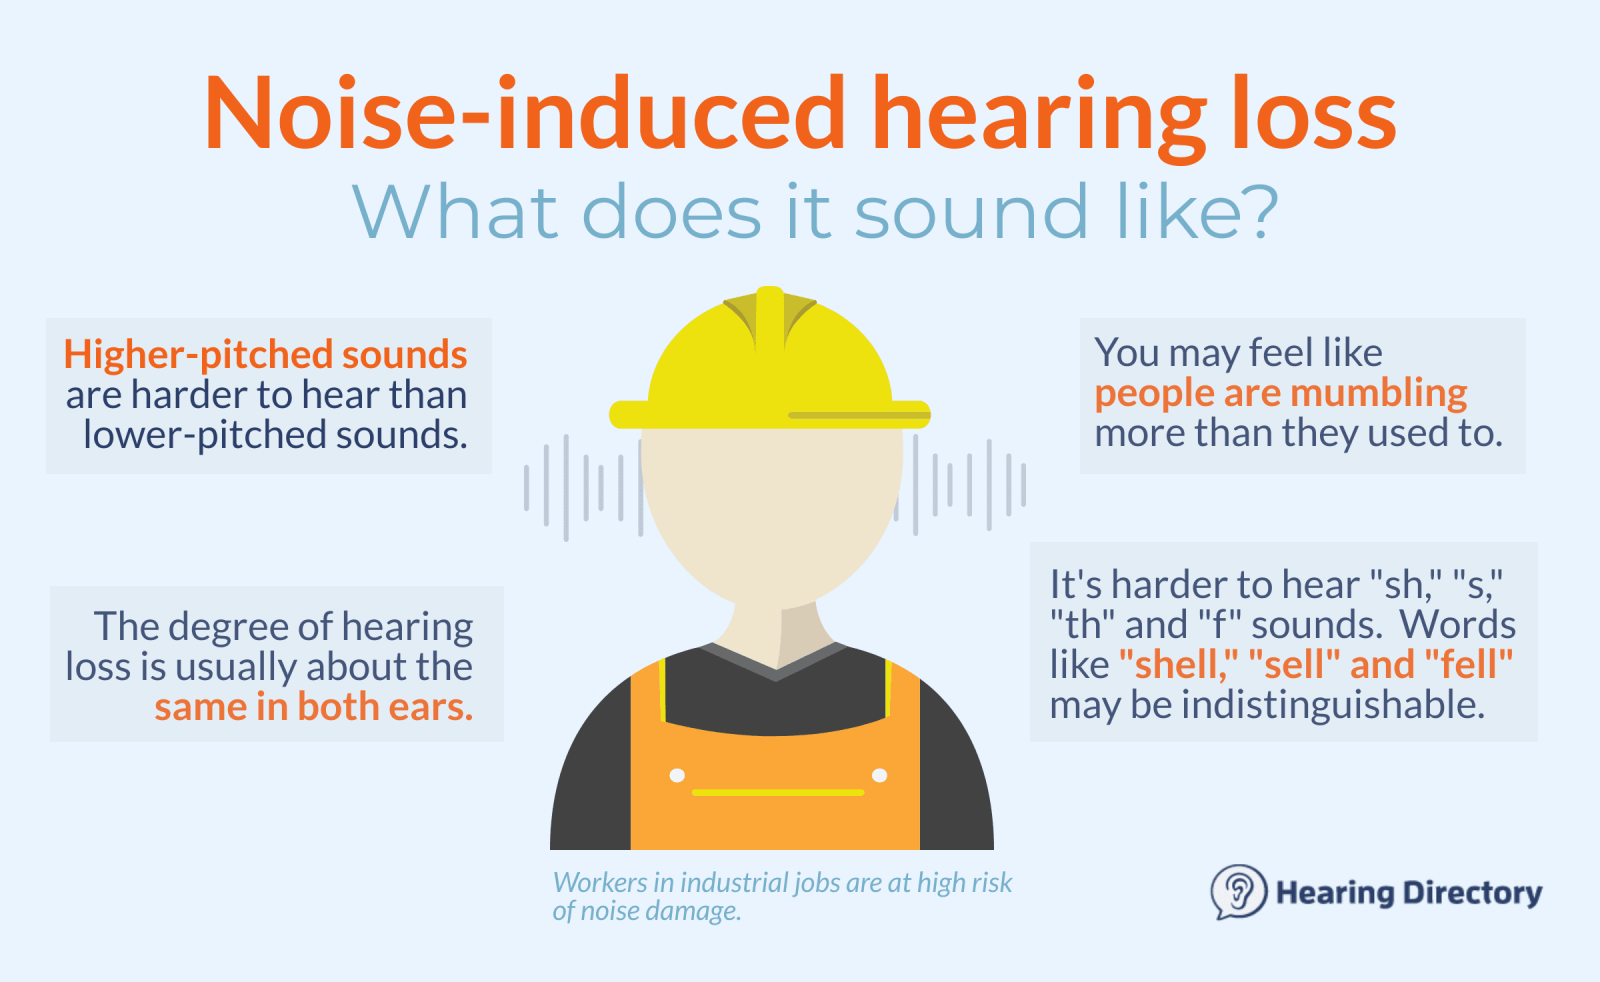 Infographic explaining what it sounds like when you have noise-induced hearing loss.